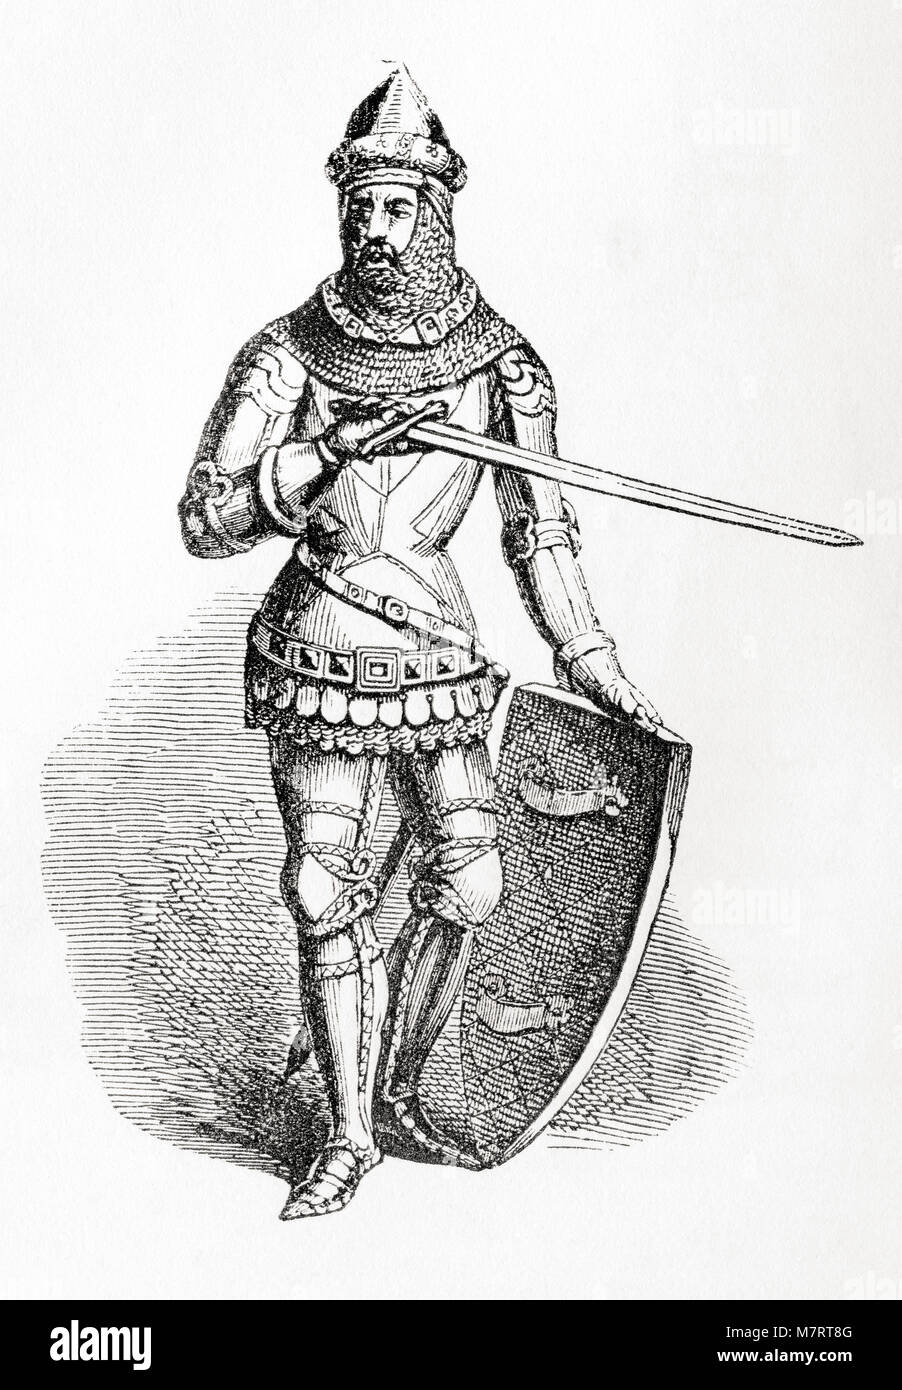 Walter Hungerford, 1st Baron Hungerford, 1378 – 1449. English knight, landowner and member of the House of Commons.  From Old England: A Pictorial Museum, published 1847. Stock Photo